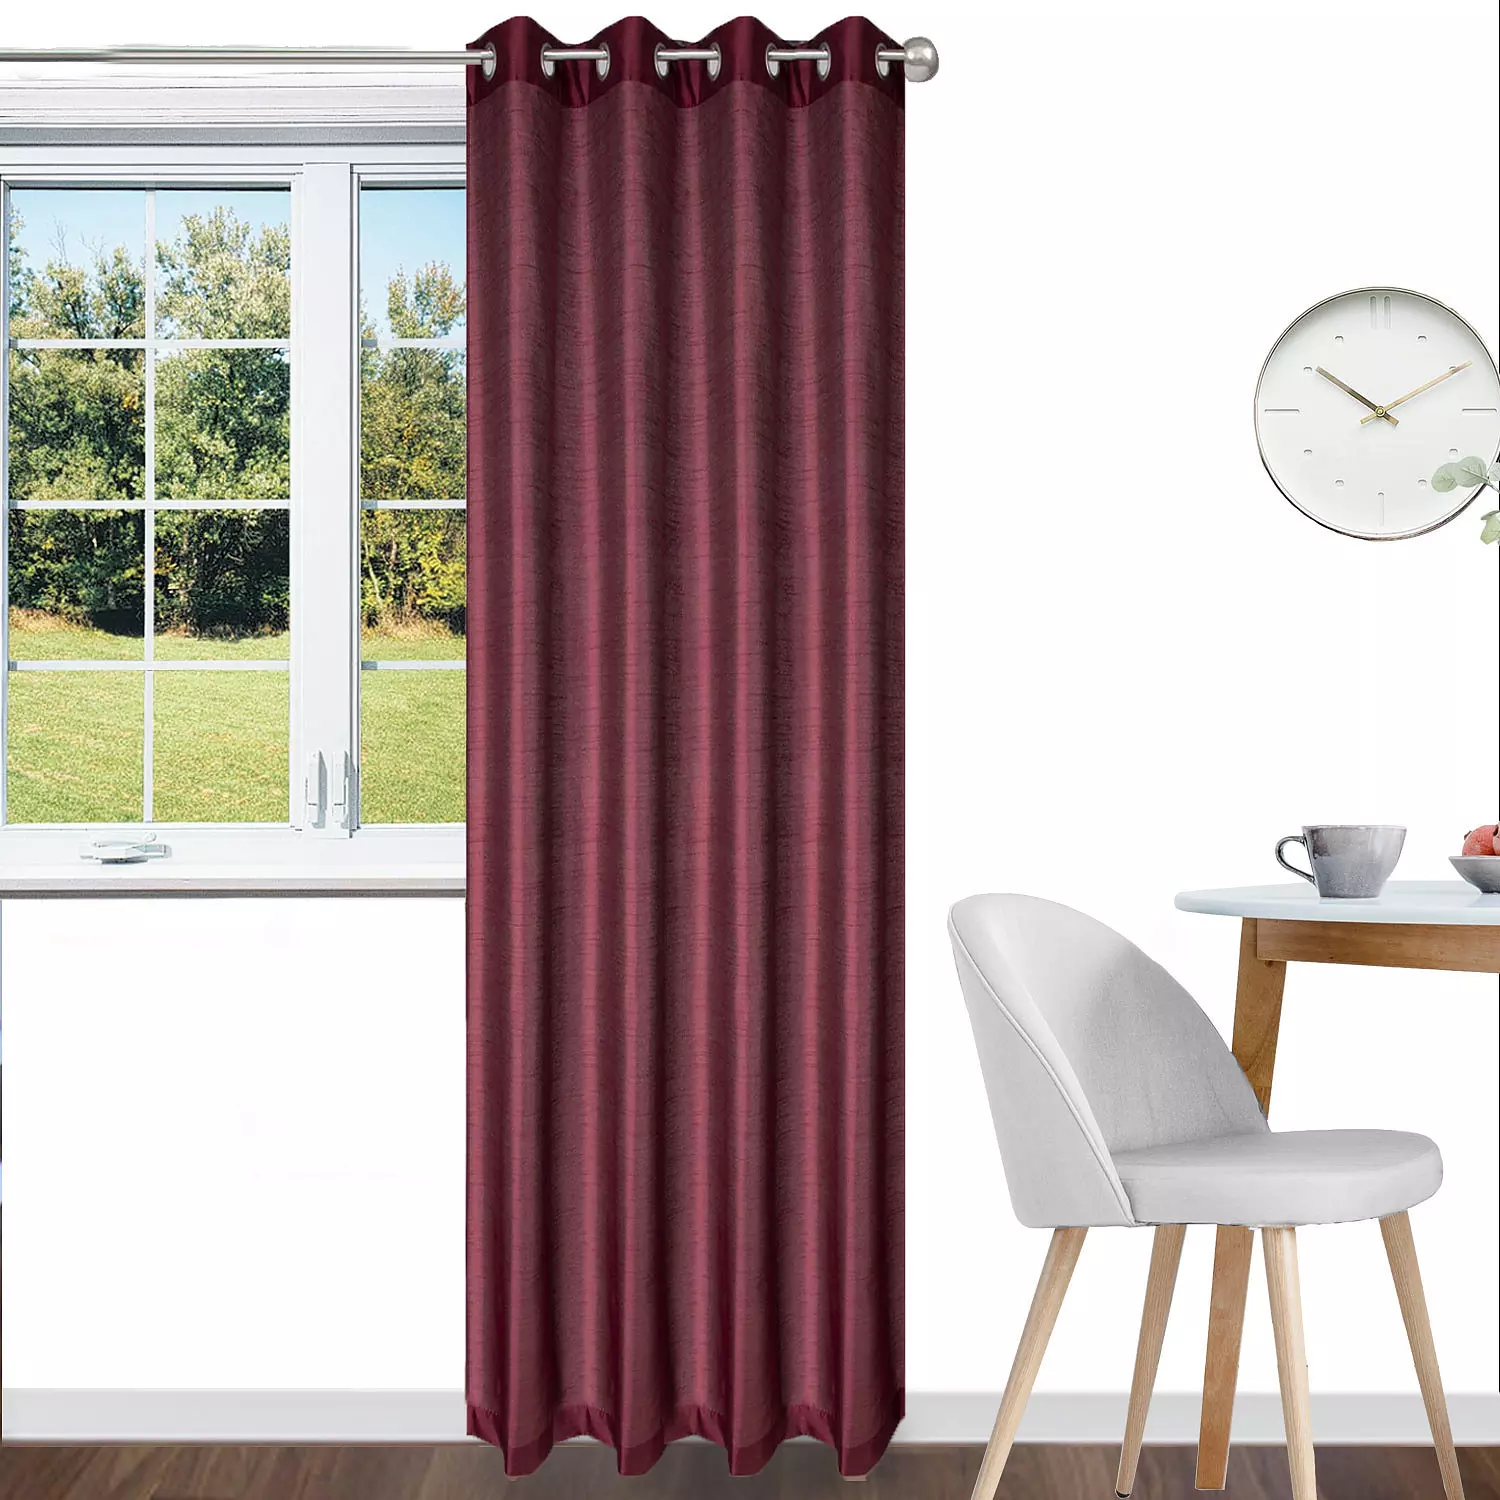 Faux silk panel with grommets, 54"x84", burgundy